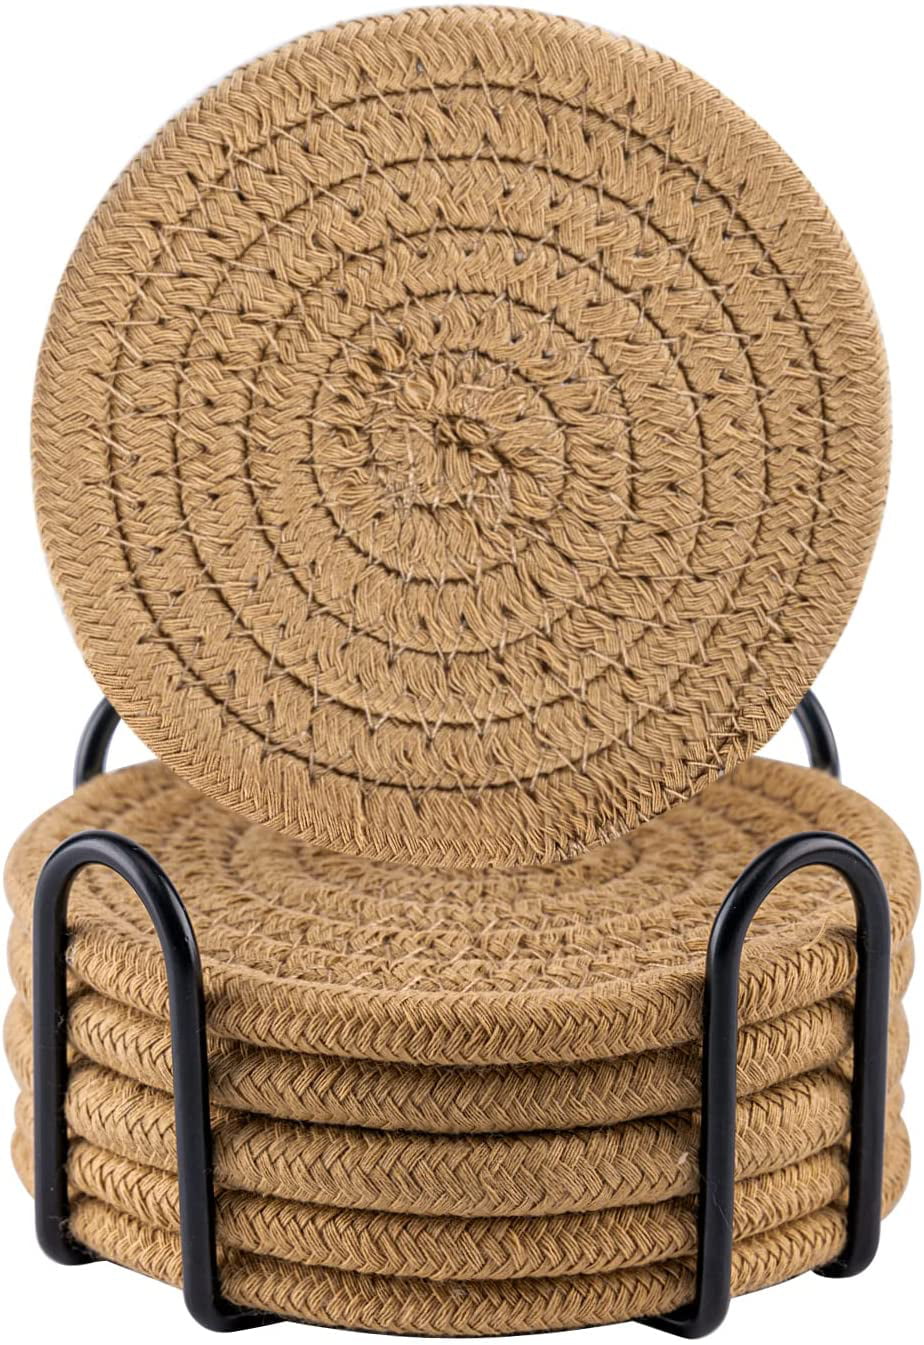 Set of 6 Vintage Rattan Drink Coasters Cup Mat With Holder Handmade Woven 